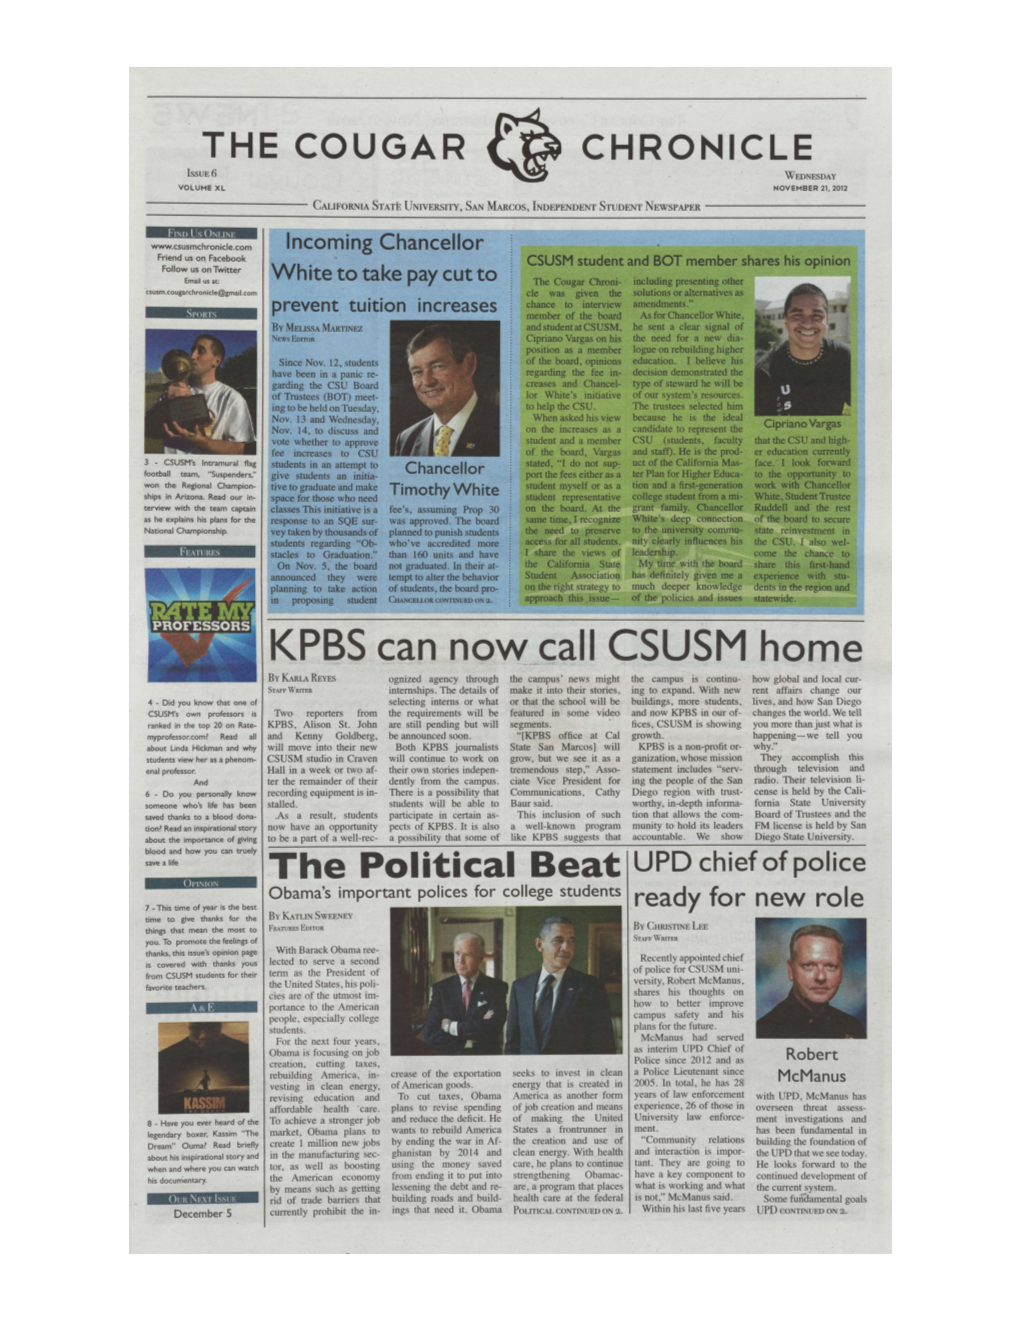 KPBS Can Now Call CSUSM Home by KARLA REYES Ognized Agency Through the Campus' News Might the Campus Is Continu- How Global and Local Cur- STAFF WRITER Internships